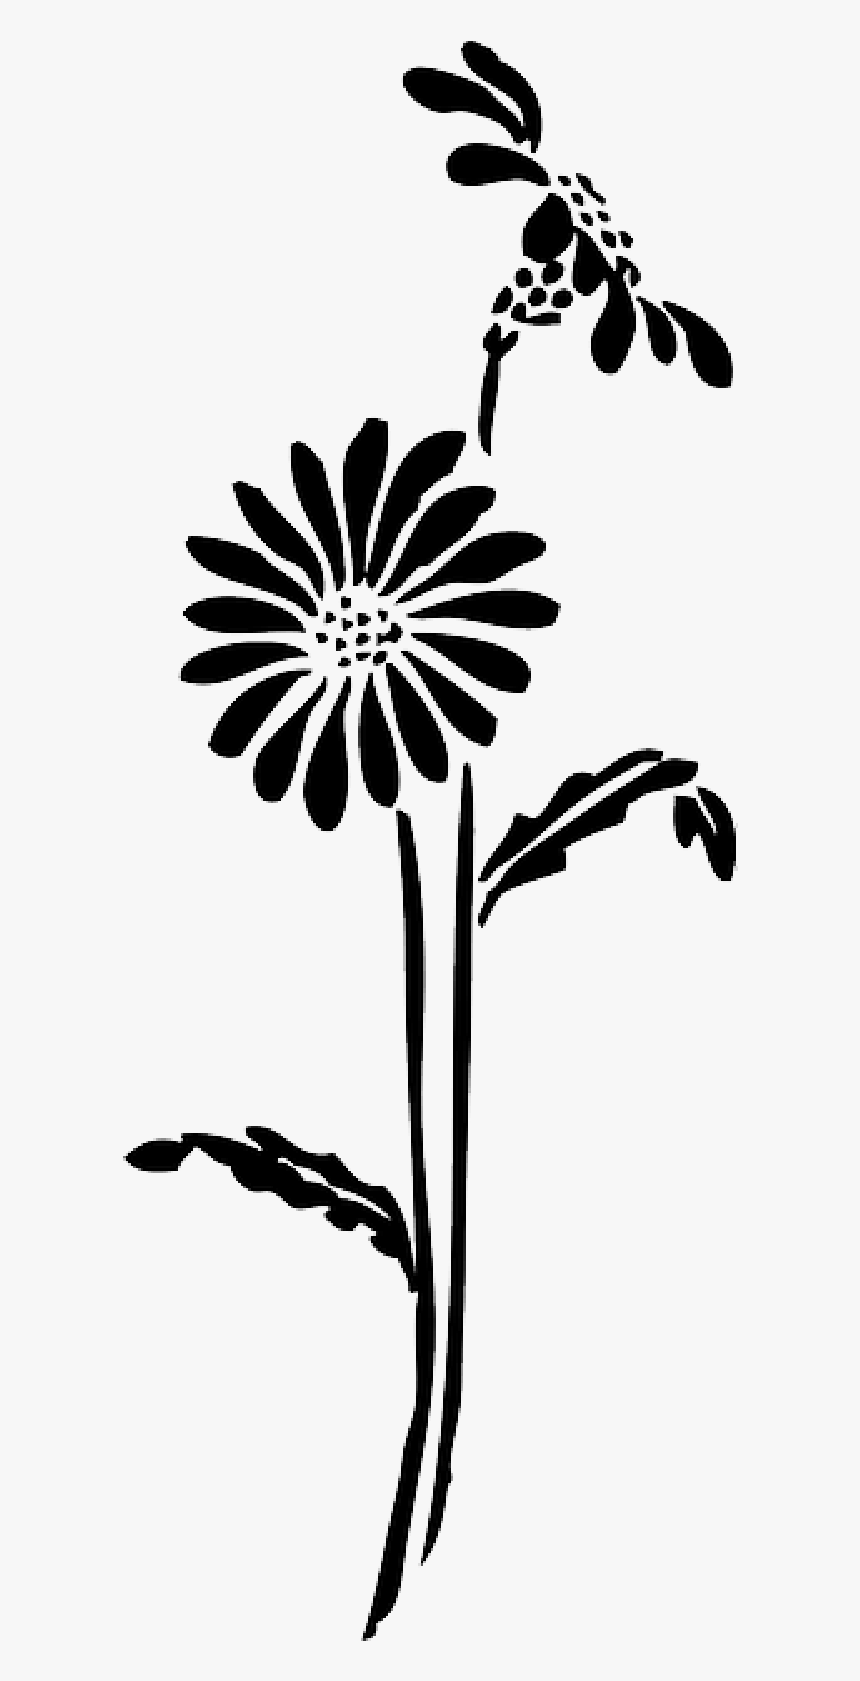 Download Black Silhouette Flower White Flowers Daisy Plant Silhouette Flower Svg Free Hd Png Download Kindpng